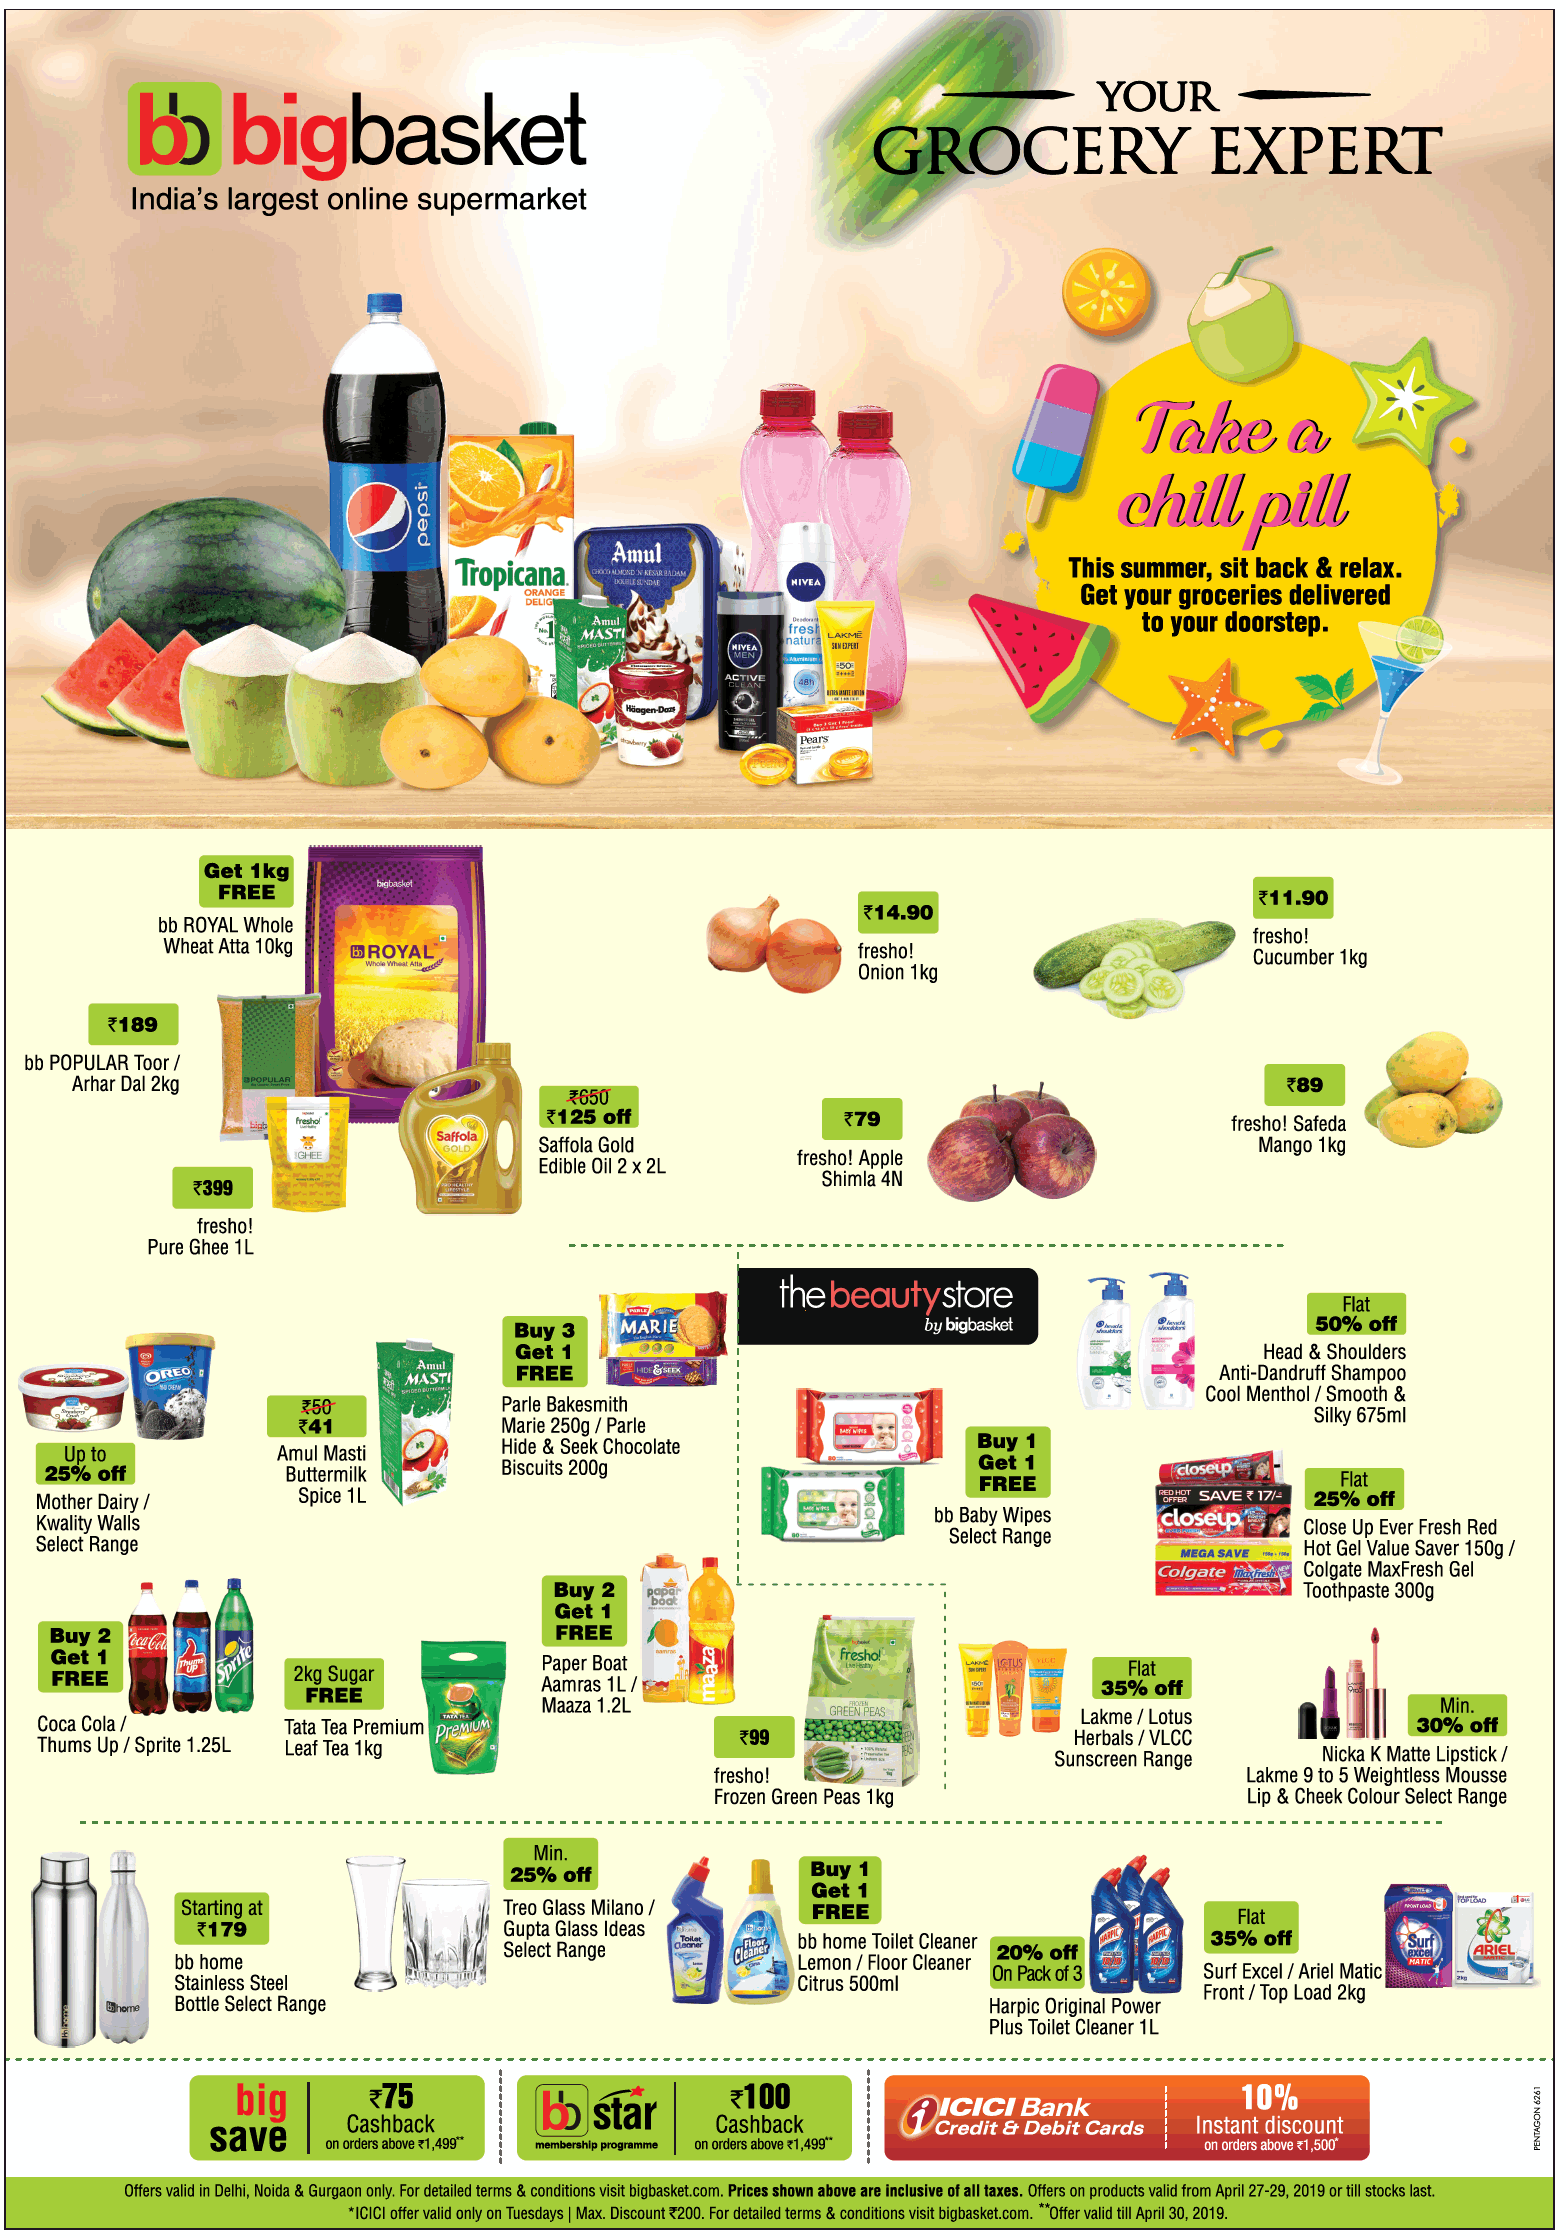 big-basket-your-grocery-expert-take-a-chill-pill-ad-delhi-times-27-04-2019.png